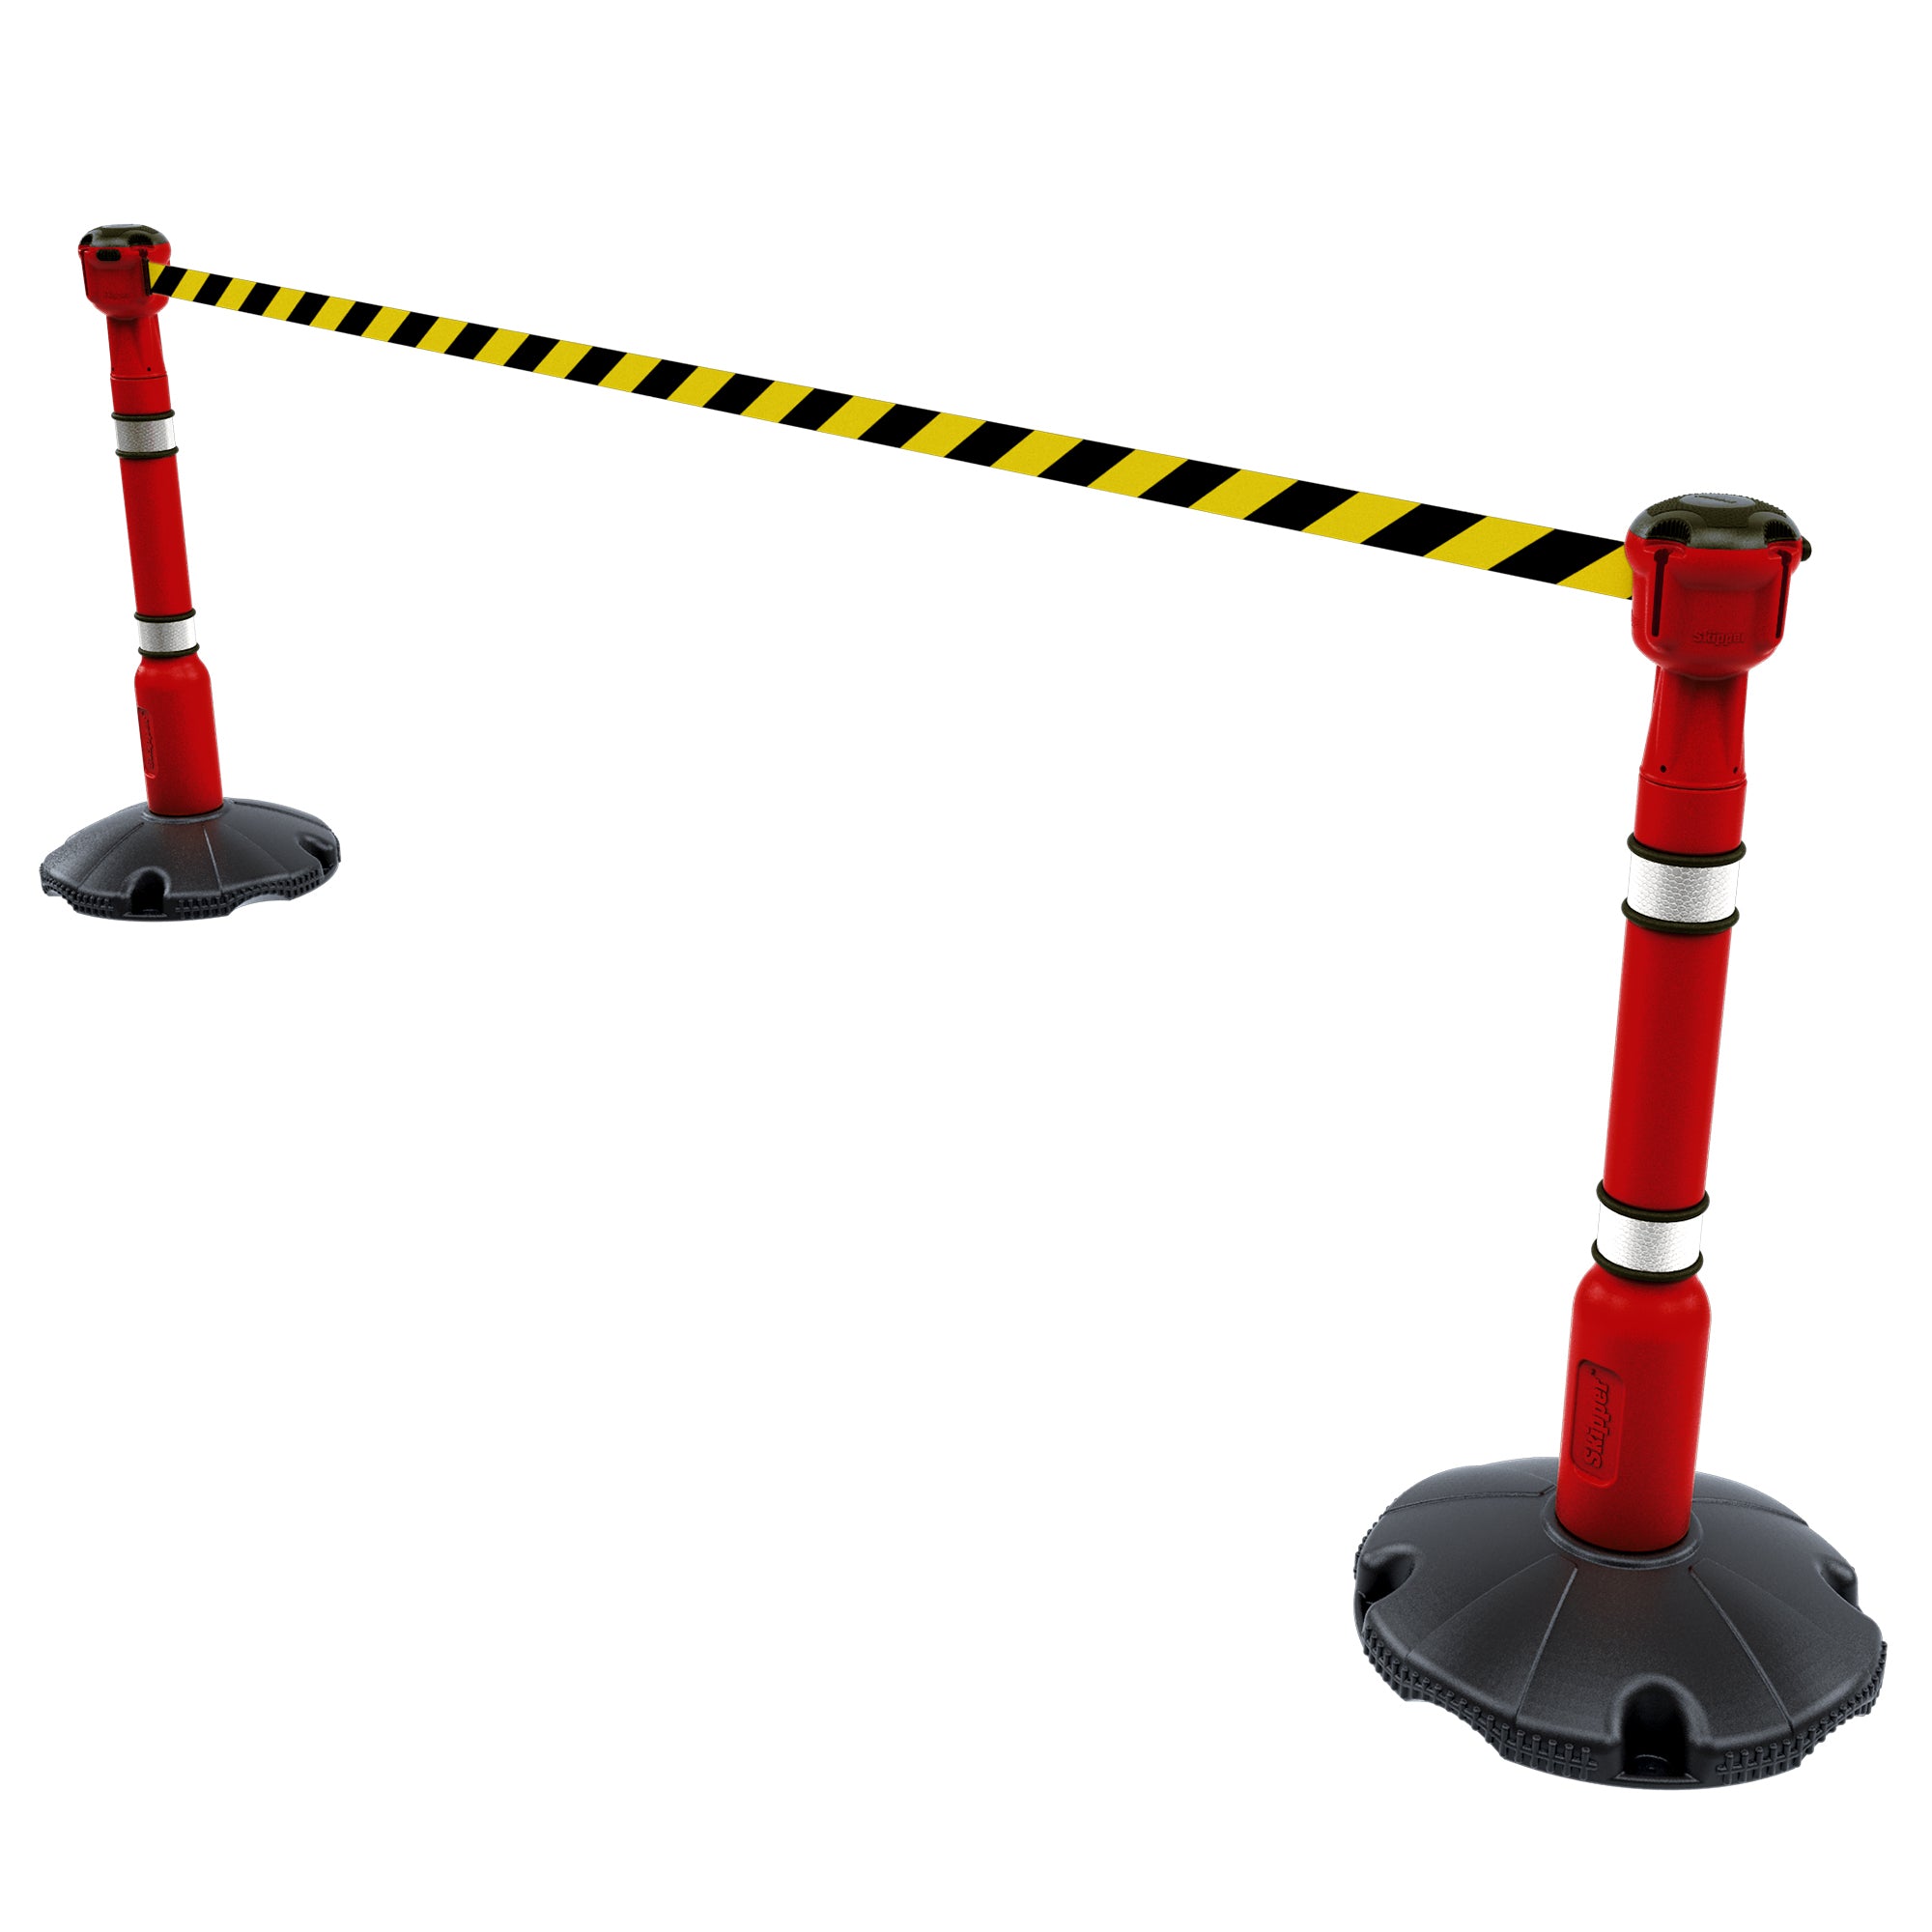 Skipper 9m Retractable Safety Barrier Complete Kit - Kit10 Retractable > Crowd Barrier > Tensa > Skipper One Stop For Safety Red Black & Yellow Chevron 